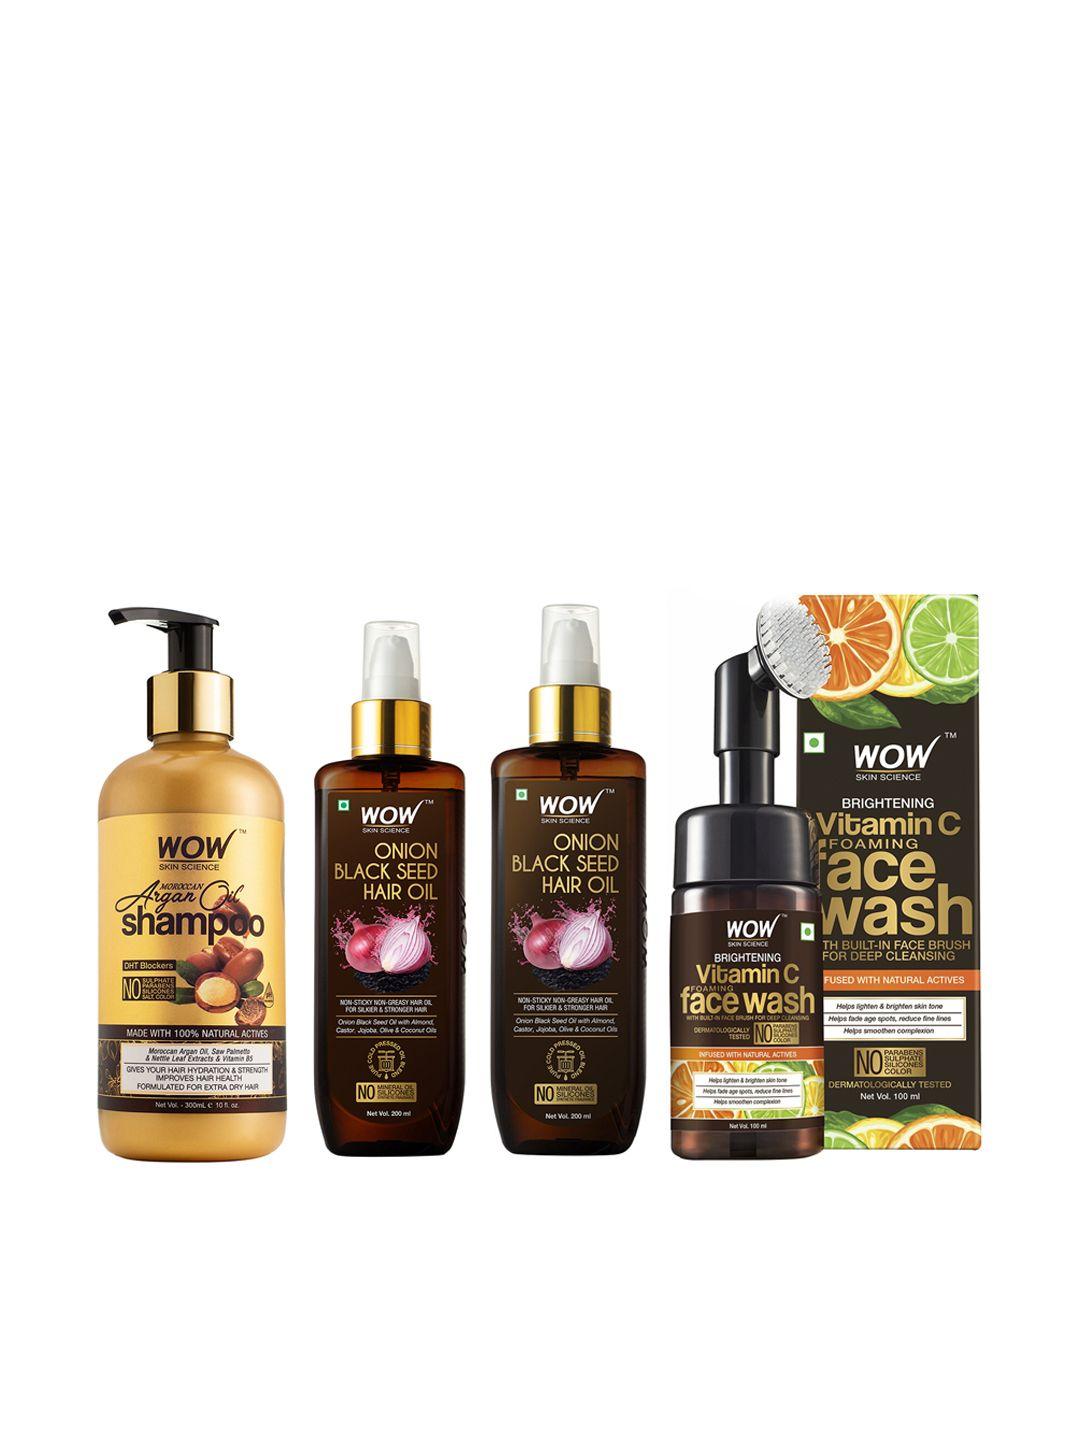 wow-skin-science-set-of-face-wash,-shampoo-&-2-onion-black-seed-hair-oil